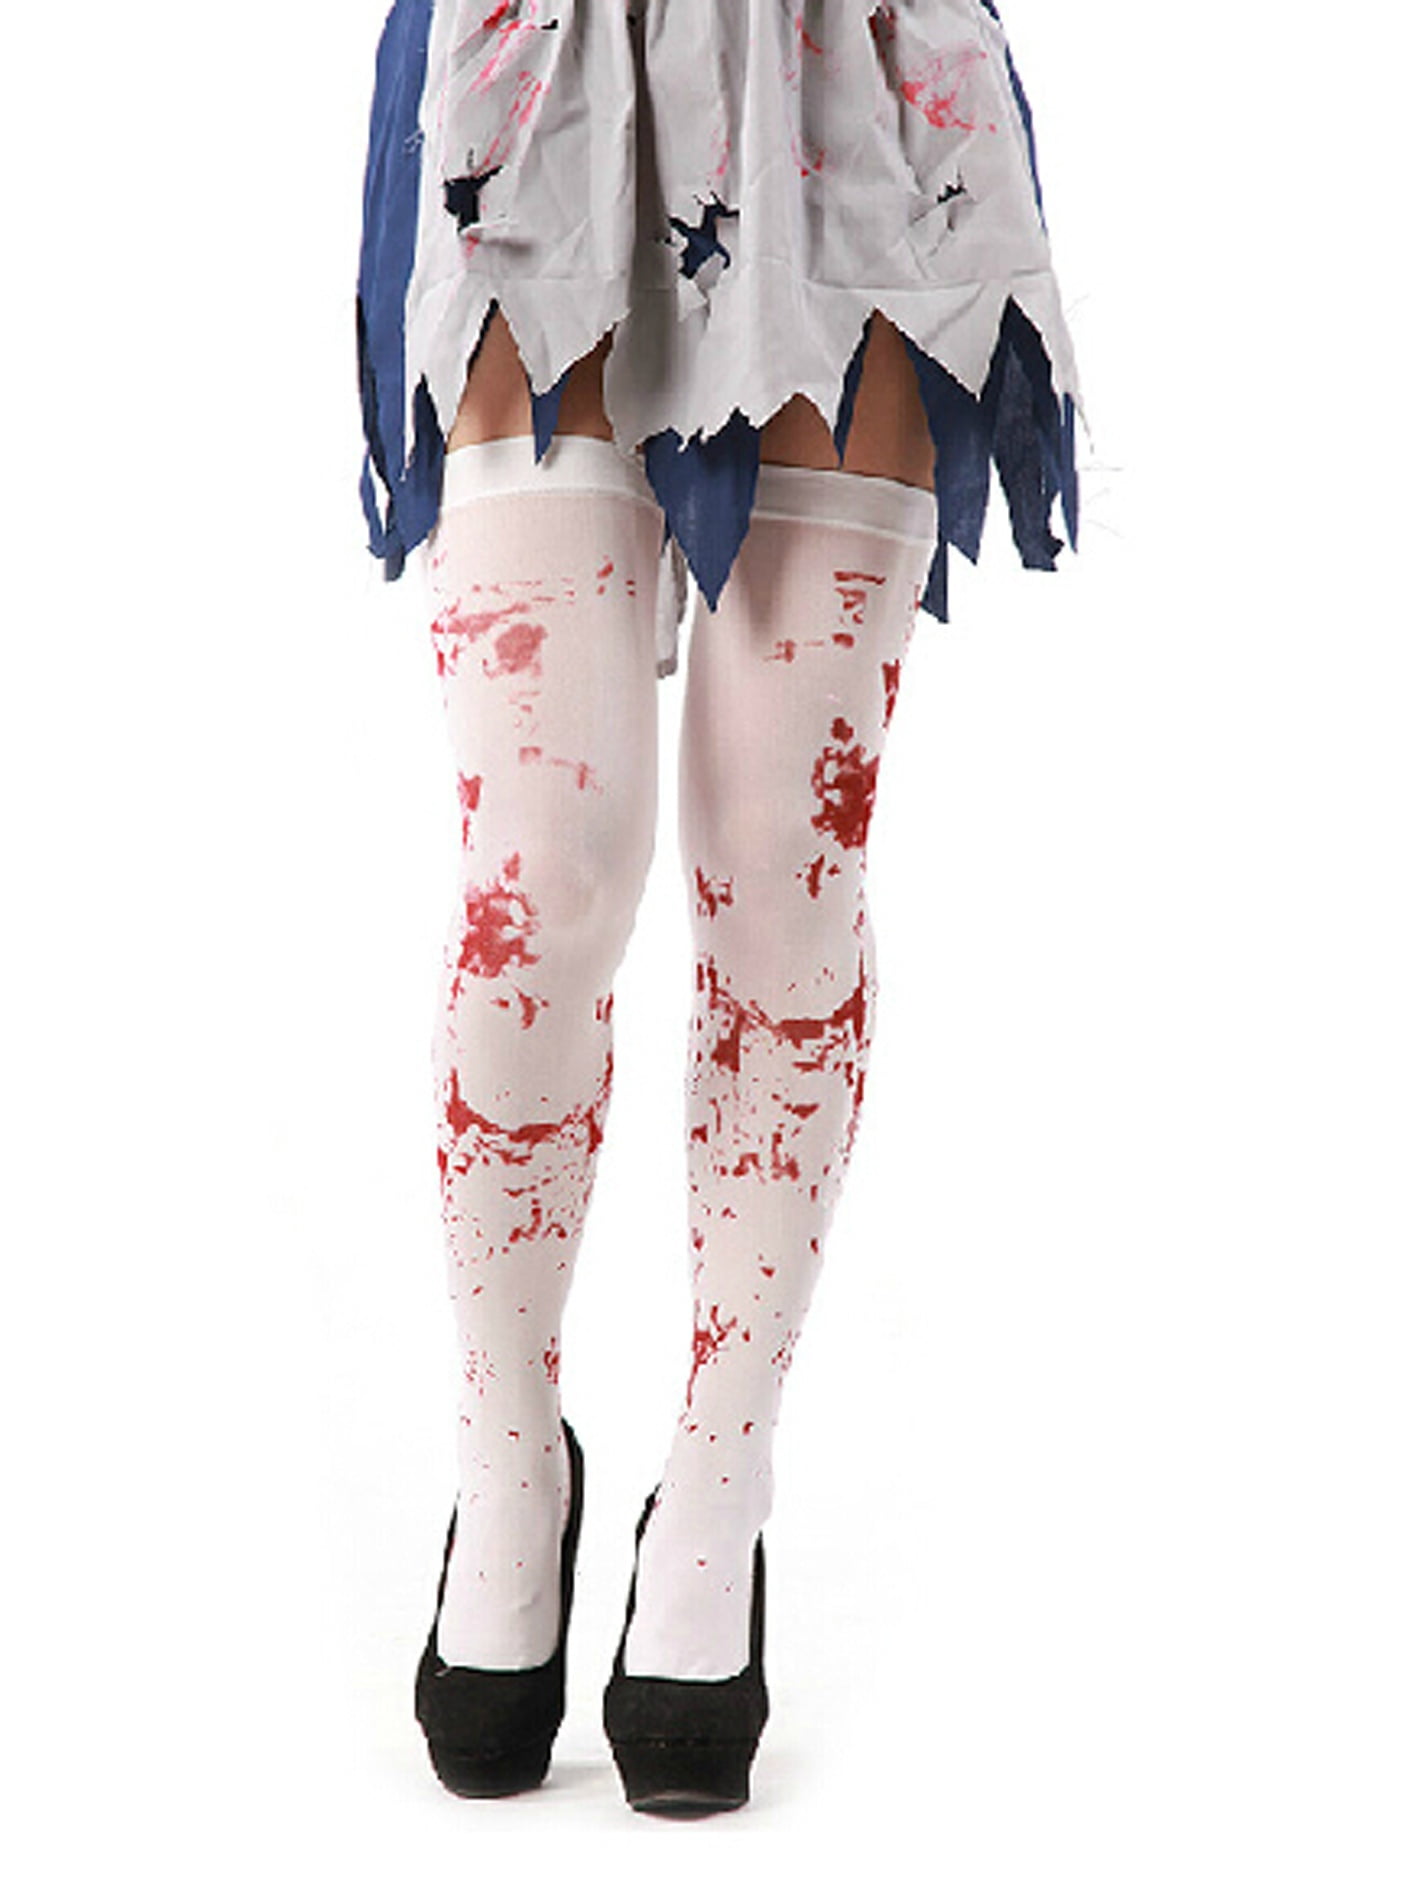 Halloween One Size Spooky Scary Blood White Tights Fancy Dress Costume Bloody 